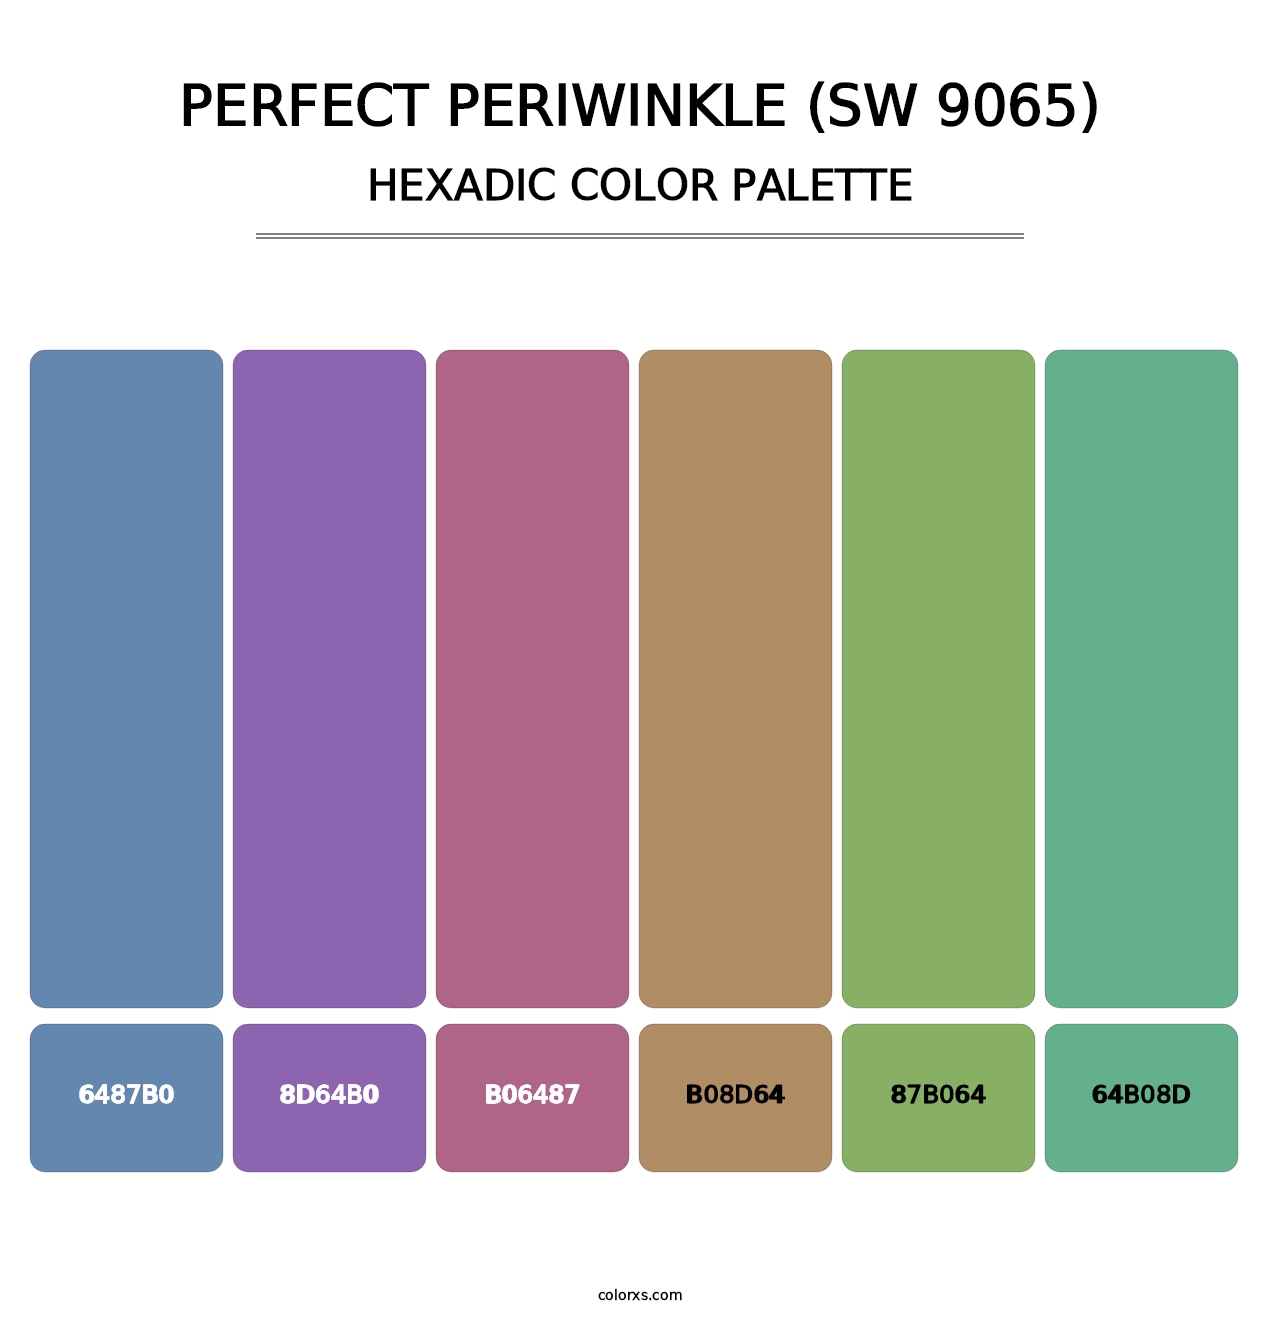 Perfect Periwinkle (SW 9065) - Hexadic Color Palette